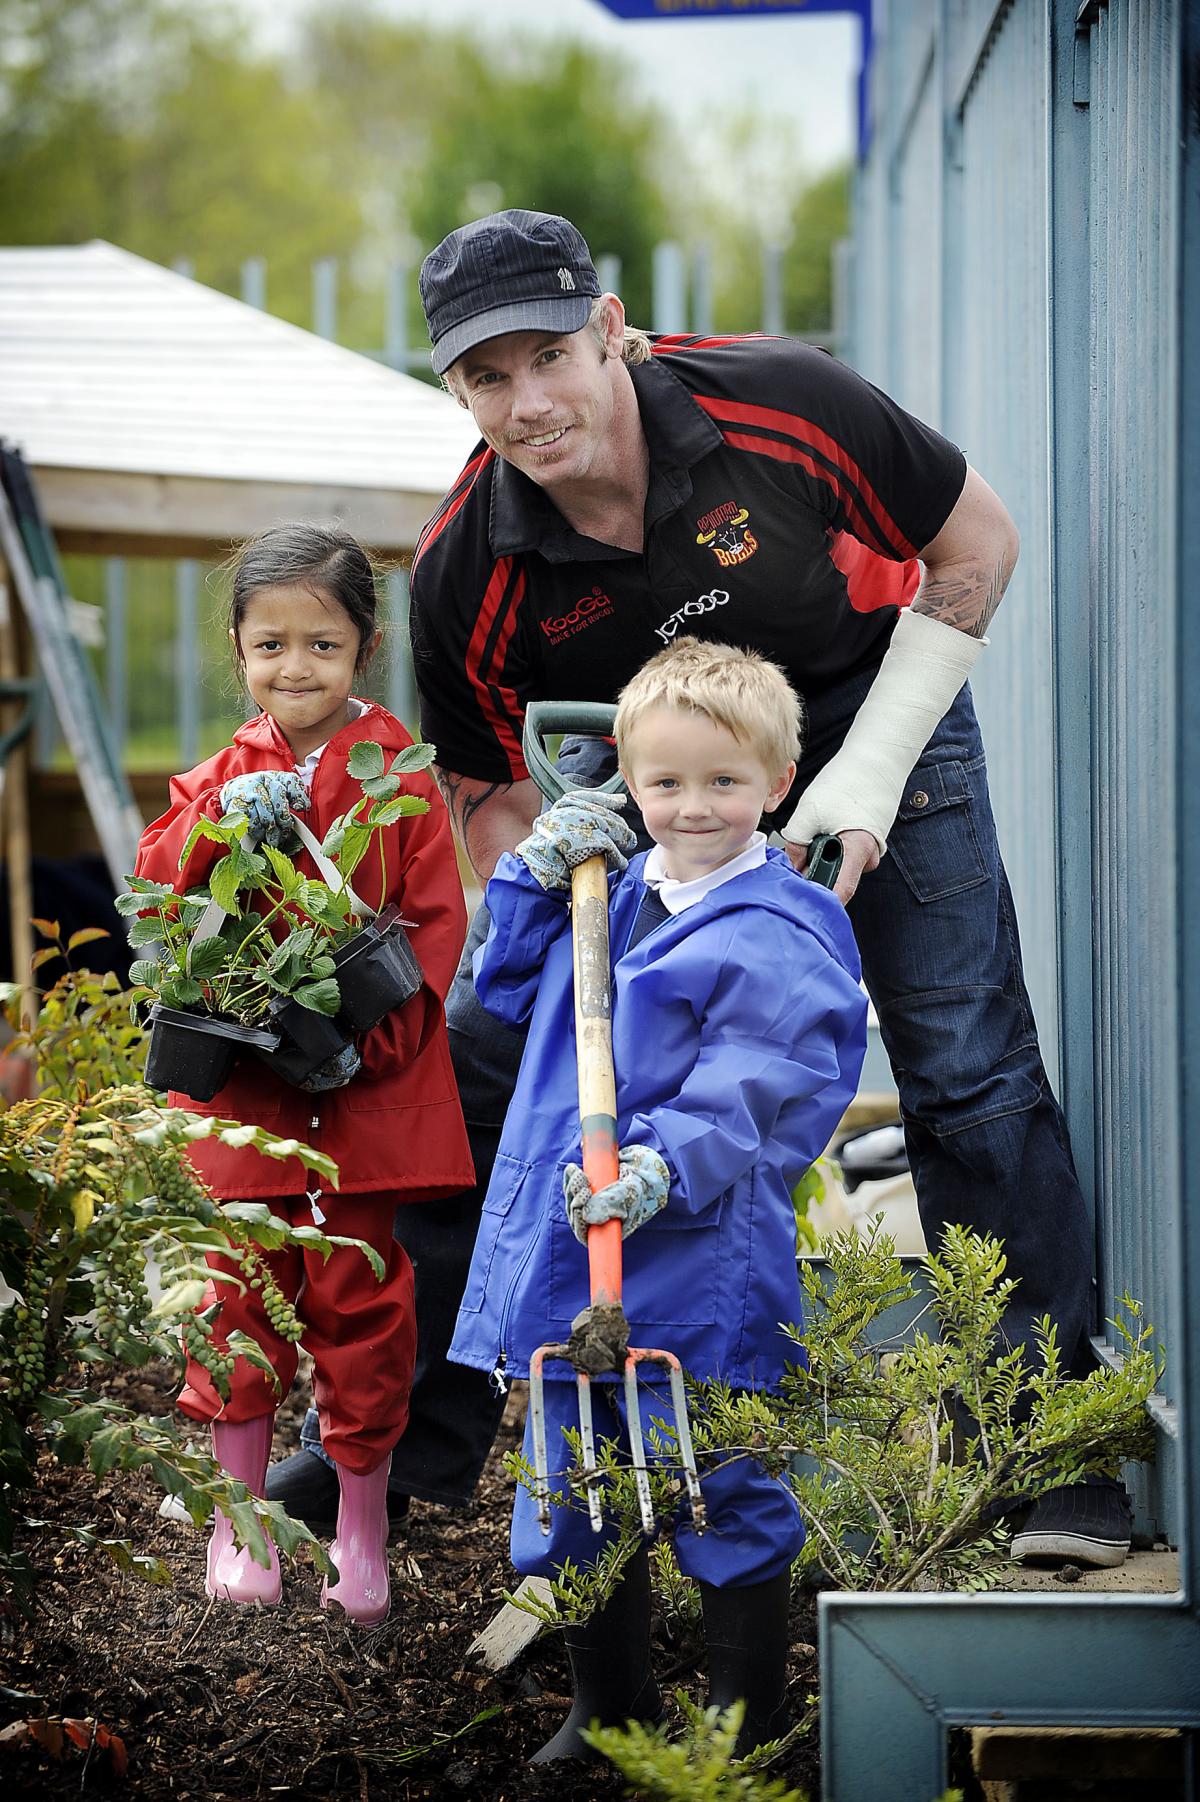 Bradford Bulls star Glen Morrison helps St Oswald's Primary School pupils Aliya Khan and Connor Jones keep up with jobs in the garden created for them by Yorkshire Water staff.